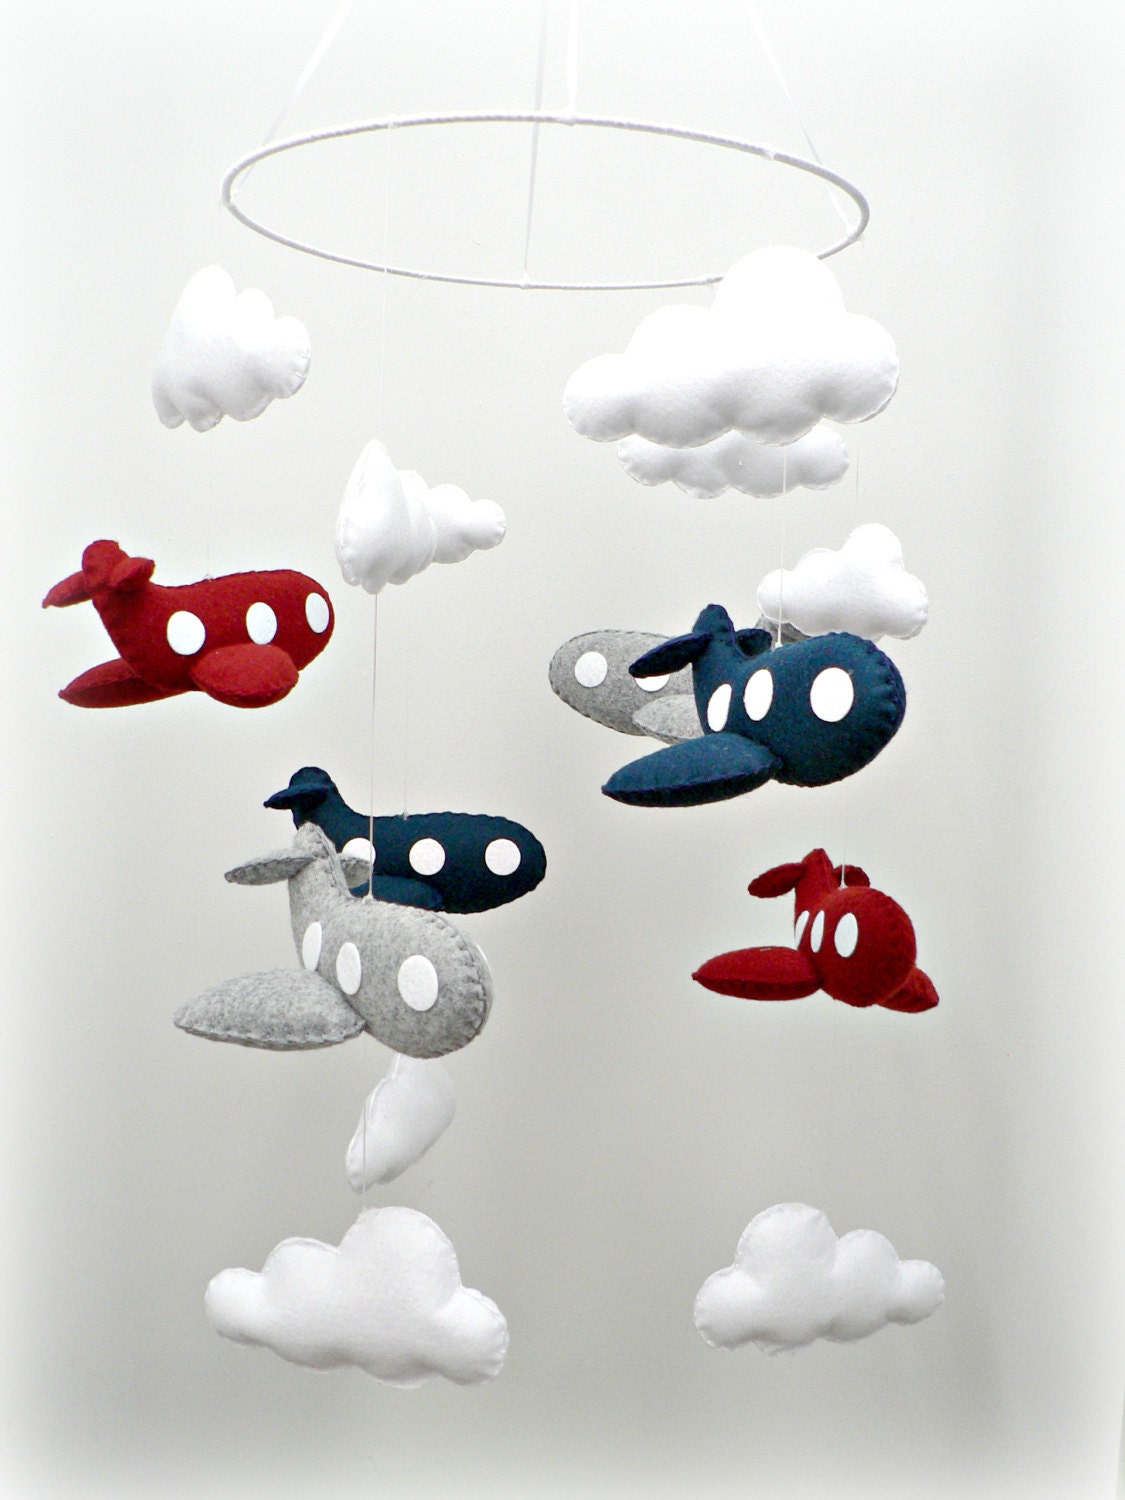 Airplane mobile - baby mobile - nursery decor - You pick your colors - crimson, navy, gray felt airplanes, white clouds - LullabyMobiles